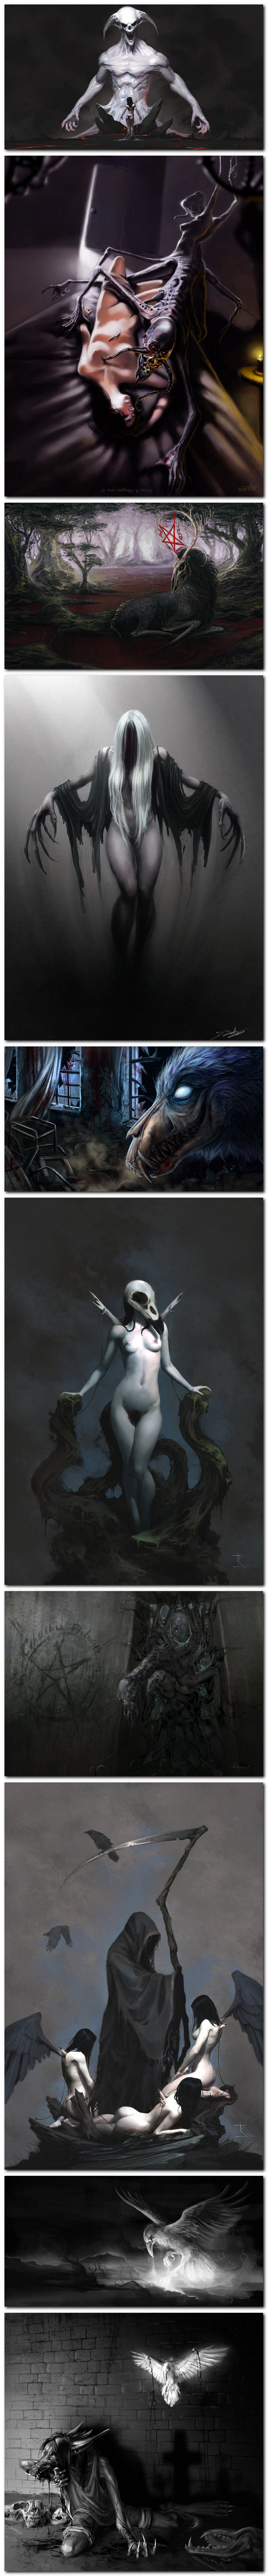 A selection of dark, but beautiful and atmospheric art. - NSFW, Longpost, Art, Images, Fantasy, Horror